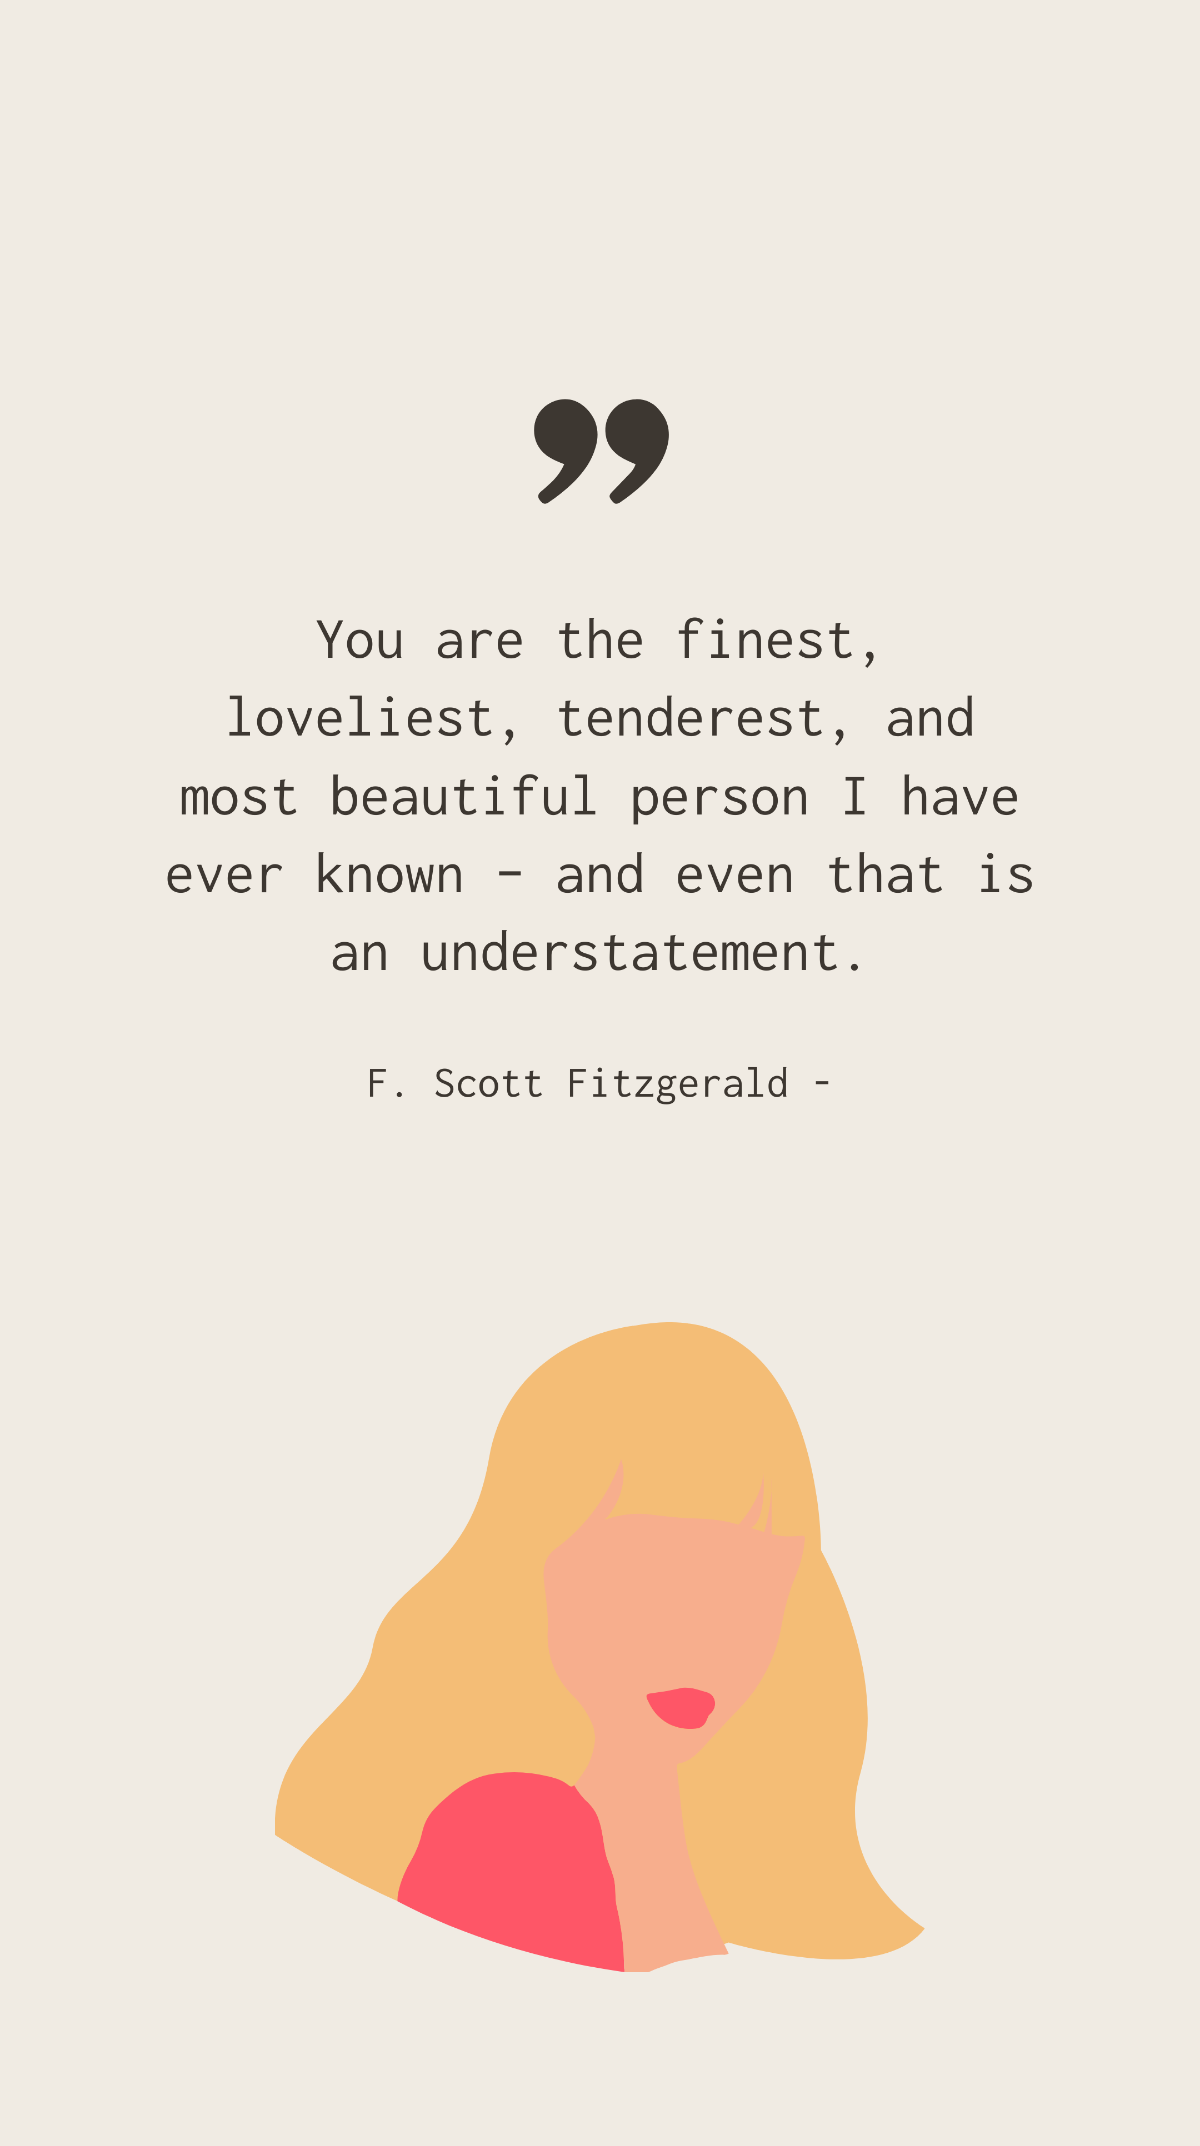 F. Scott Fitzgerald - You are the finest, loveliest, tenderest, and most beautiful person I have ever known – and even that is an understatement. Template